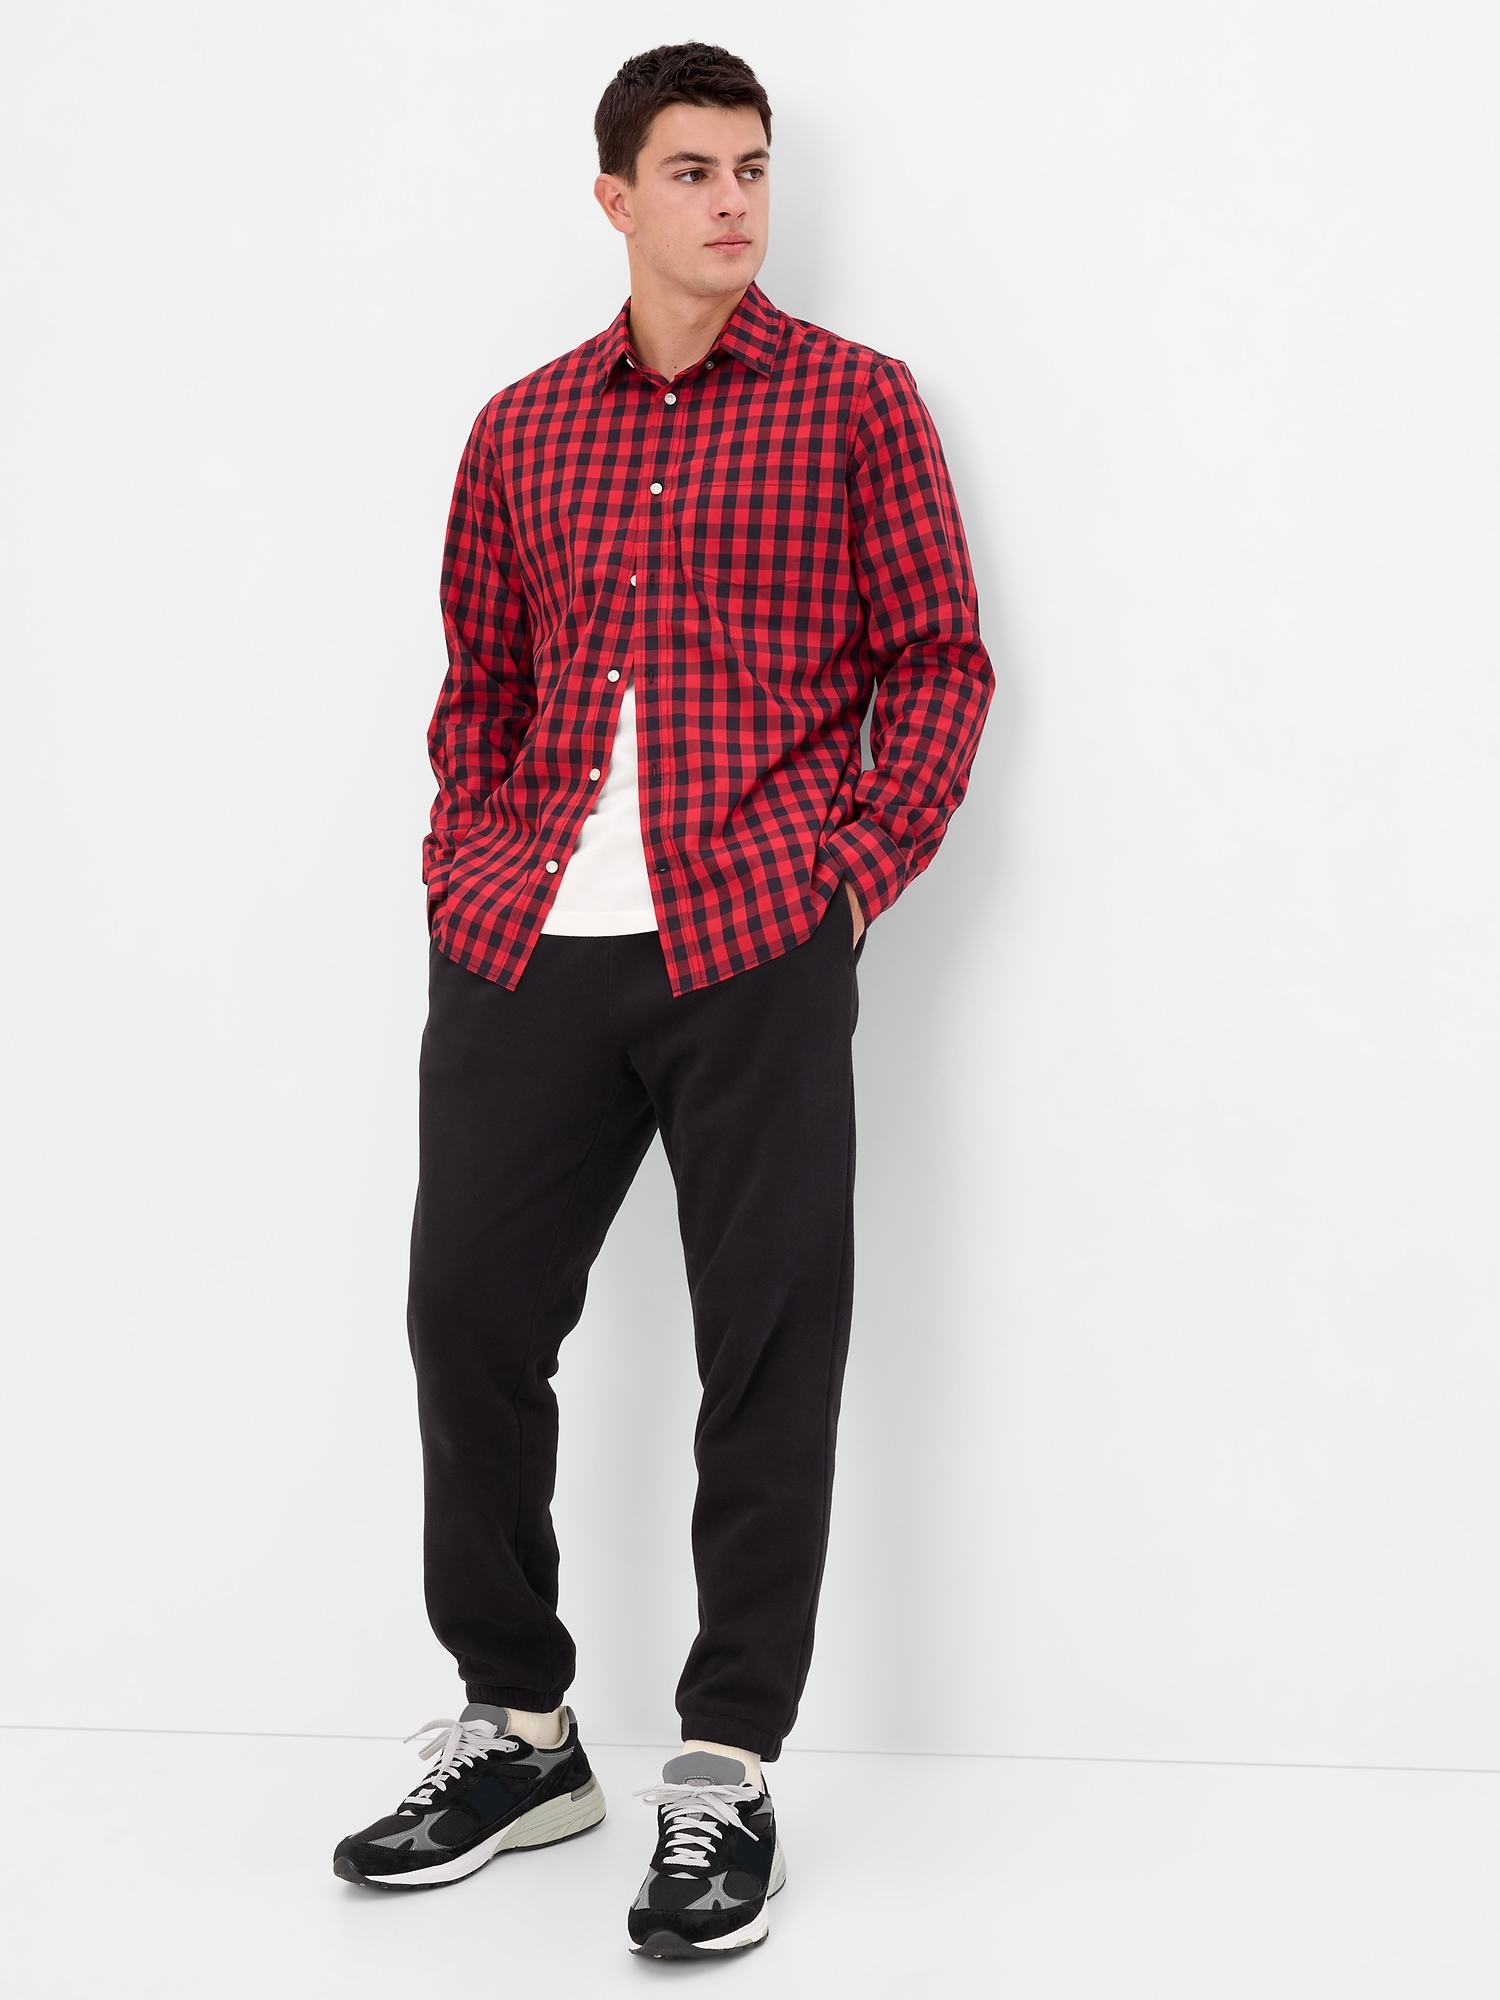 Gap All-day Poplin Shirt In Standard Fit In Red Buffalo Check